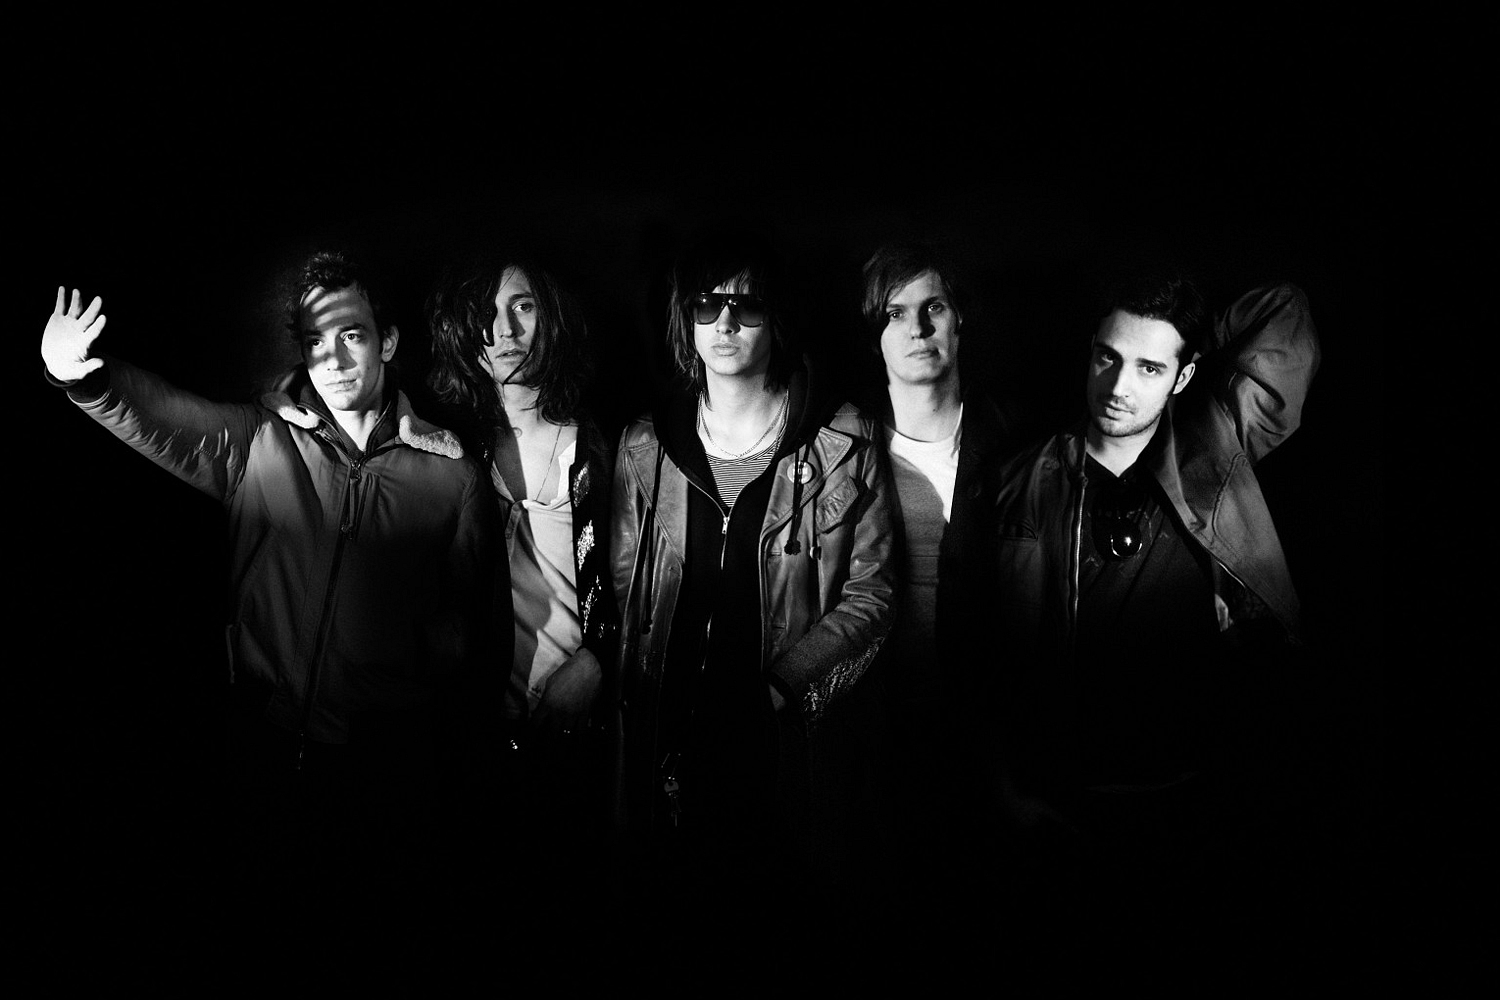 “It’s going to be awesome music,” says Nick Valensi about the new Strokes album